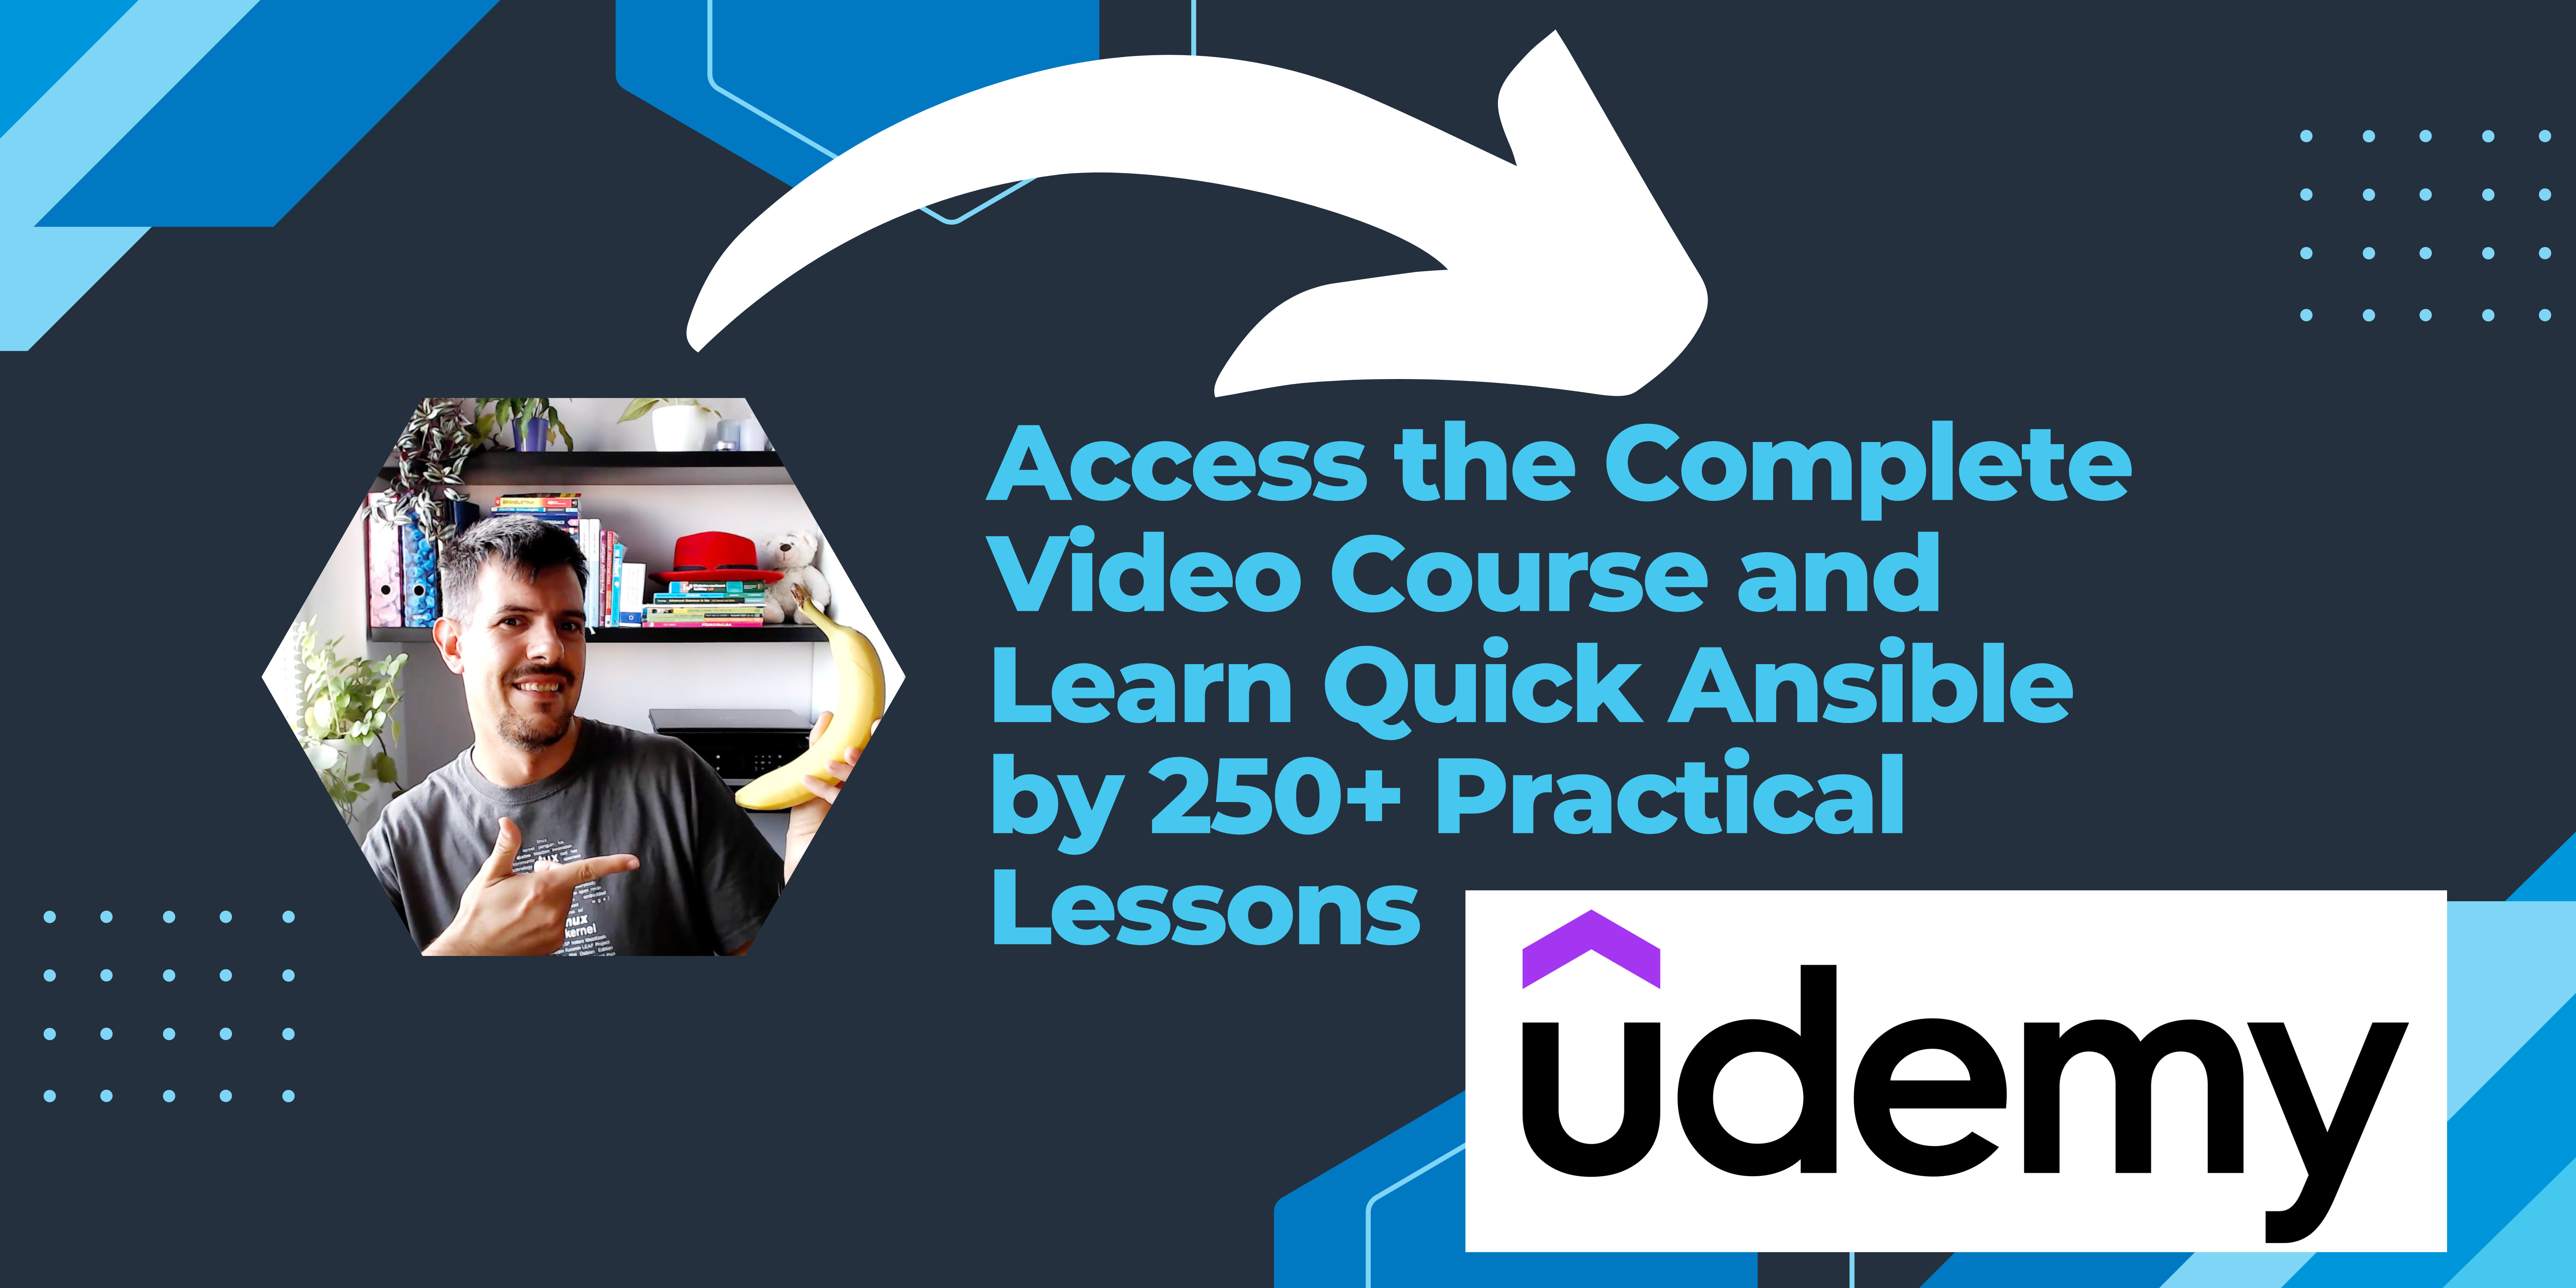 Access the Complete Video Course and Learn Quick Ansible by 200+ Practical Lessons